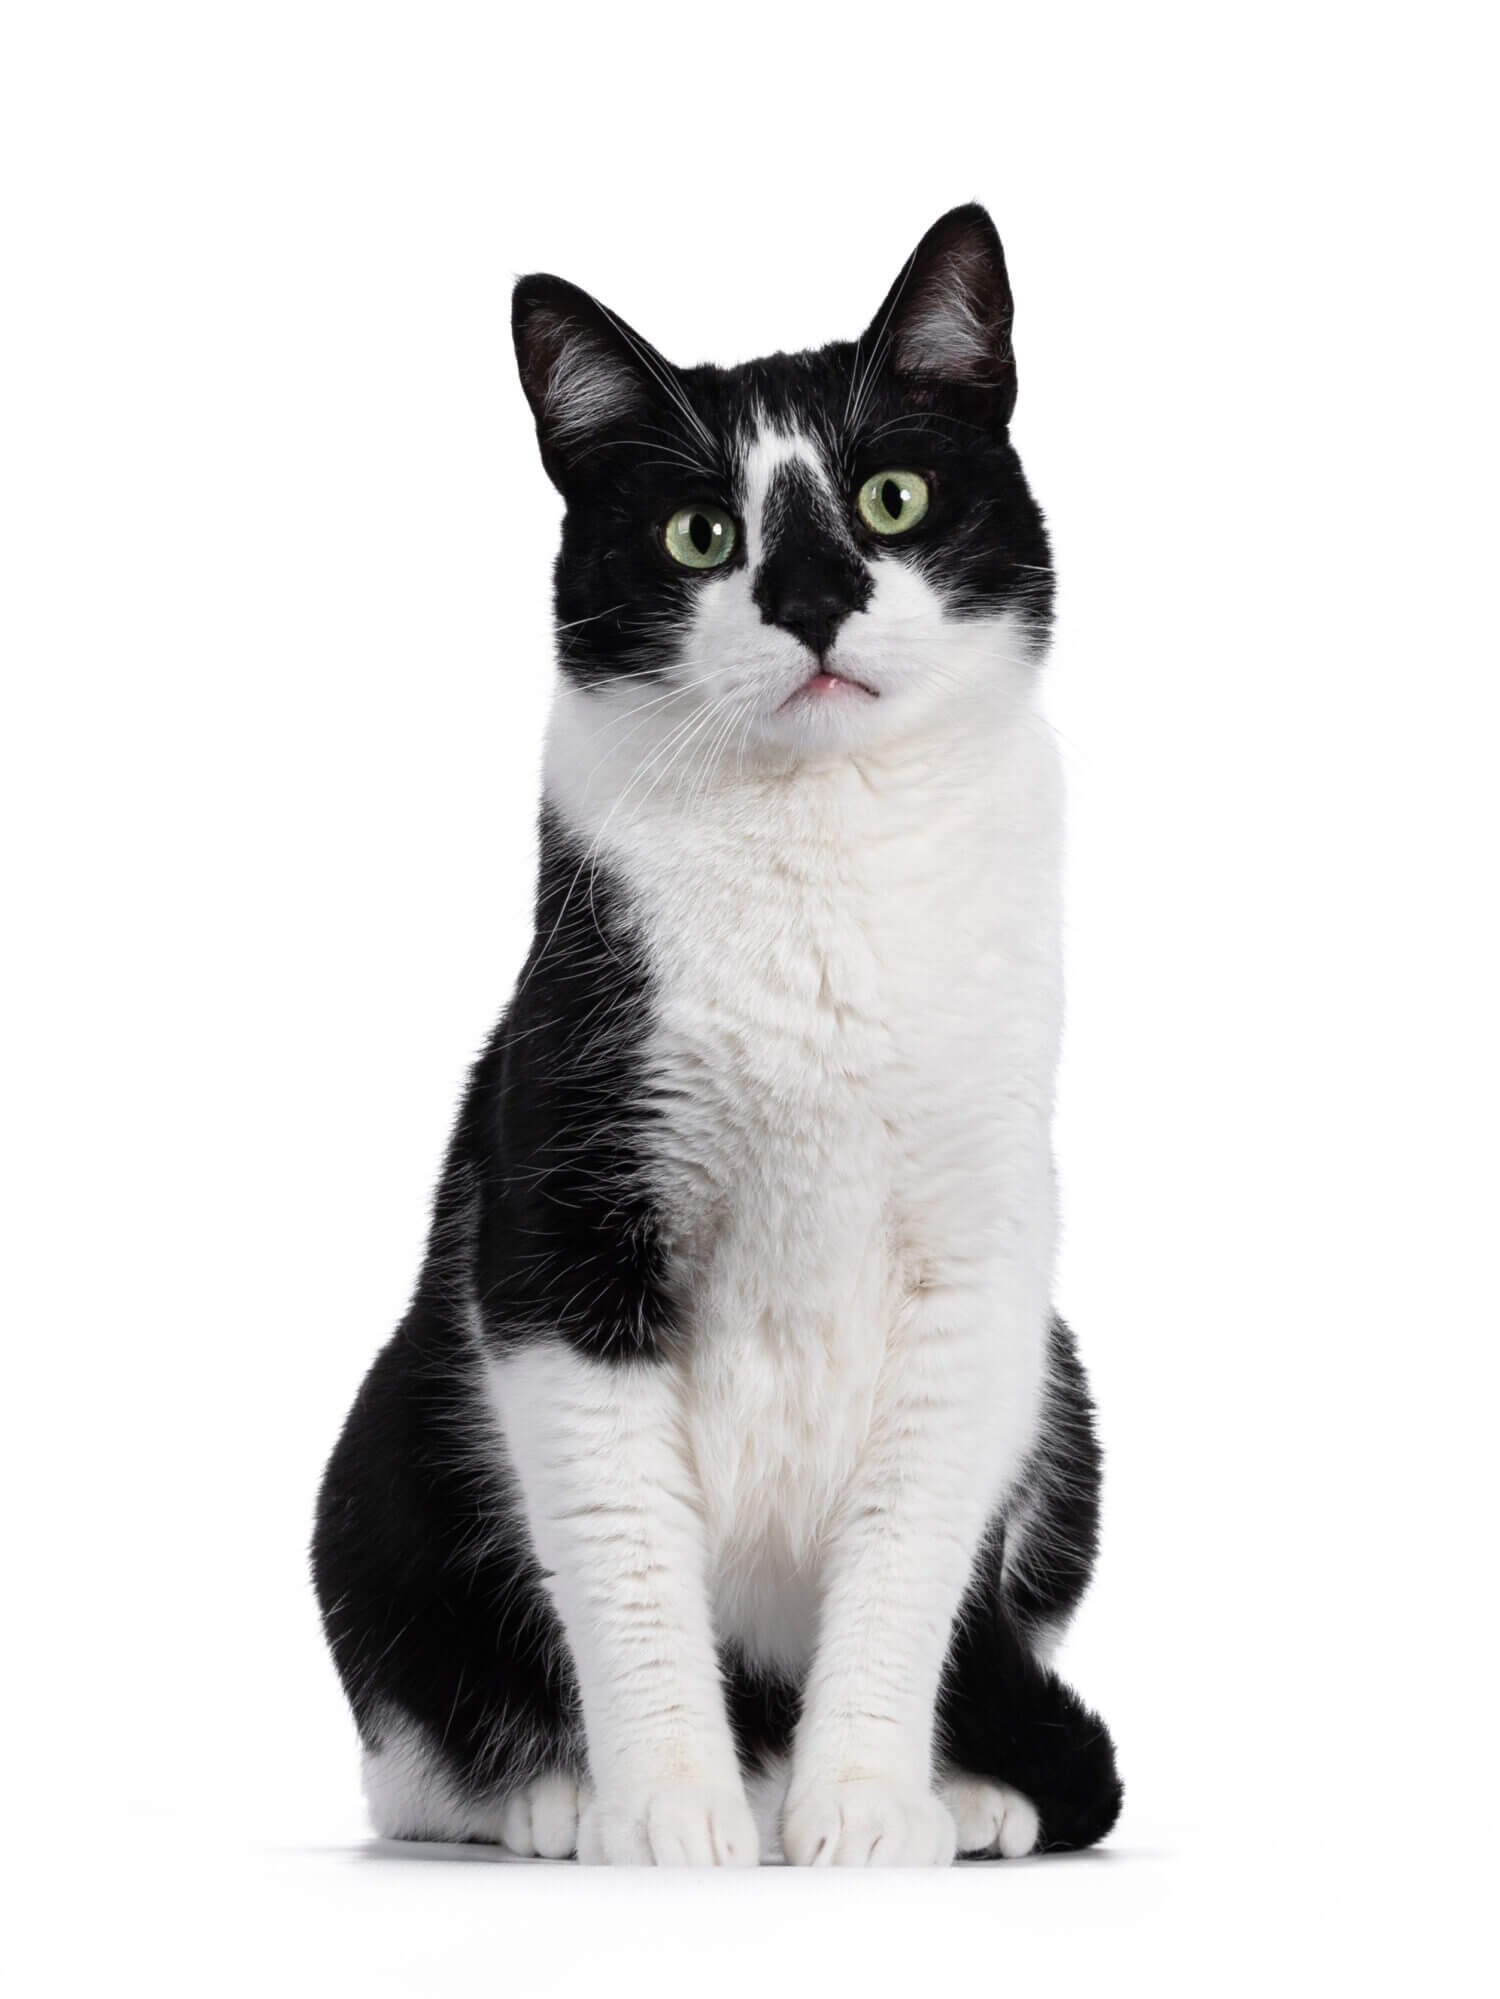 Handsome black and white house cat sitting up facing front. Looking straight ahead with green eyes. Isolated on white background.